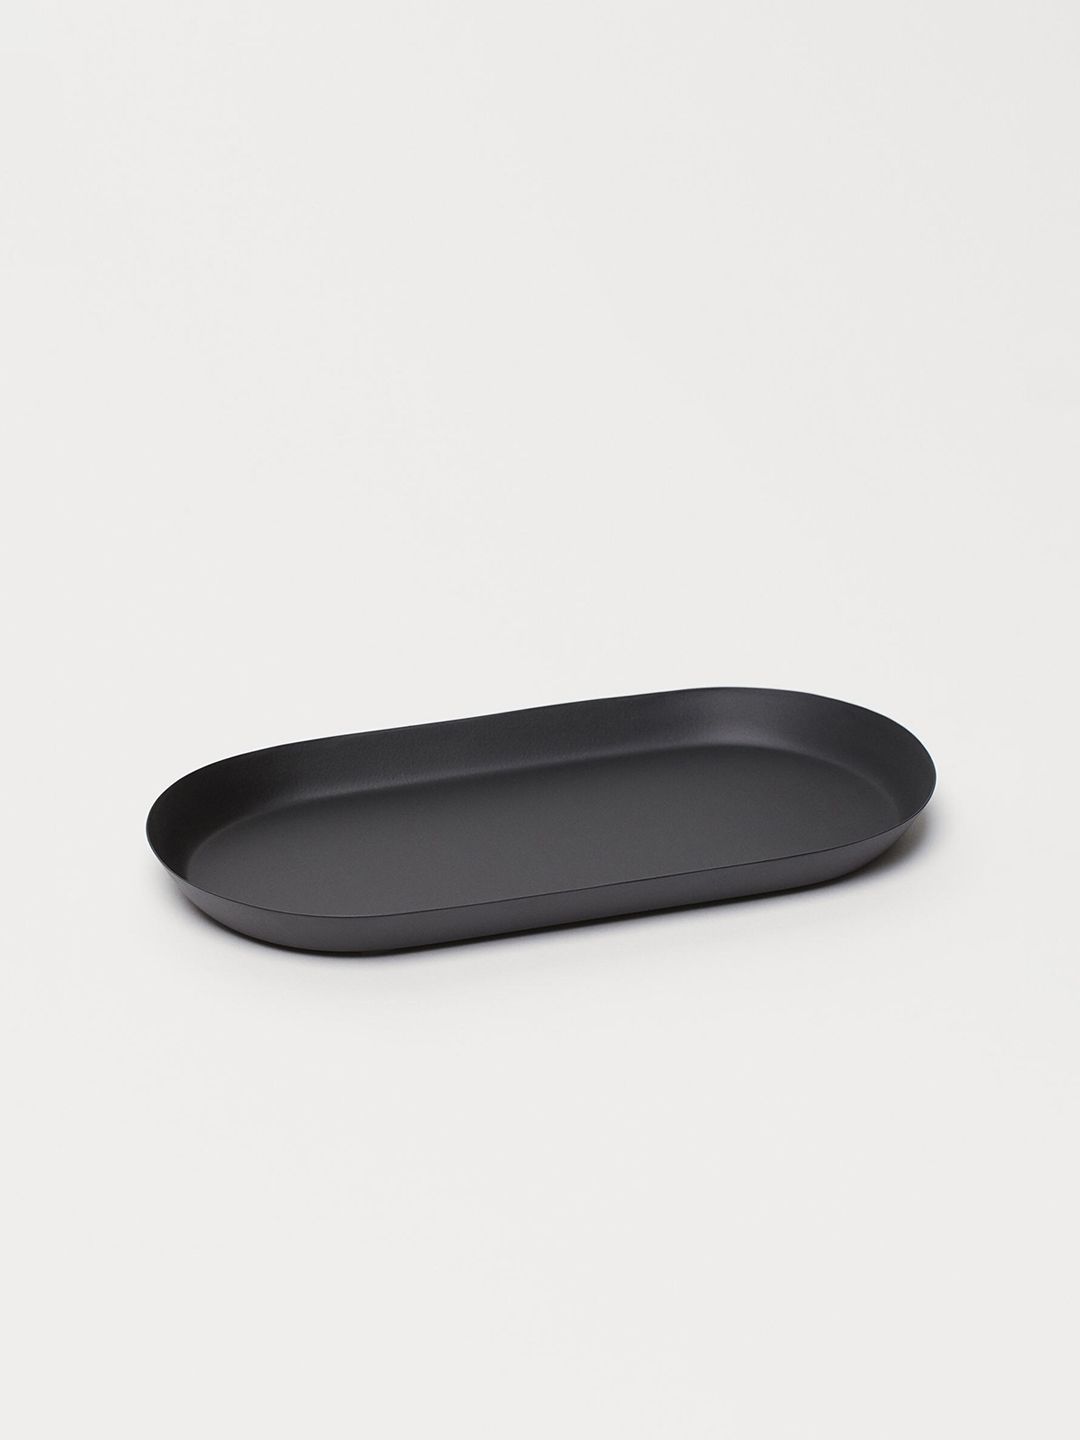 H&M Unisex Black Small Metal Tray Price in India